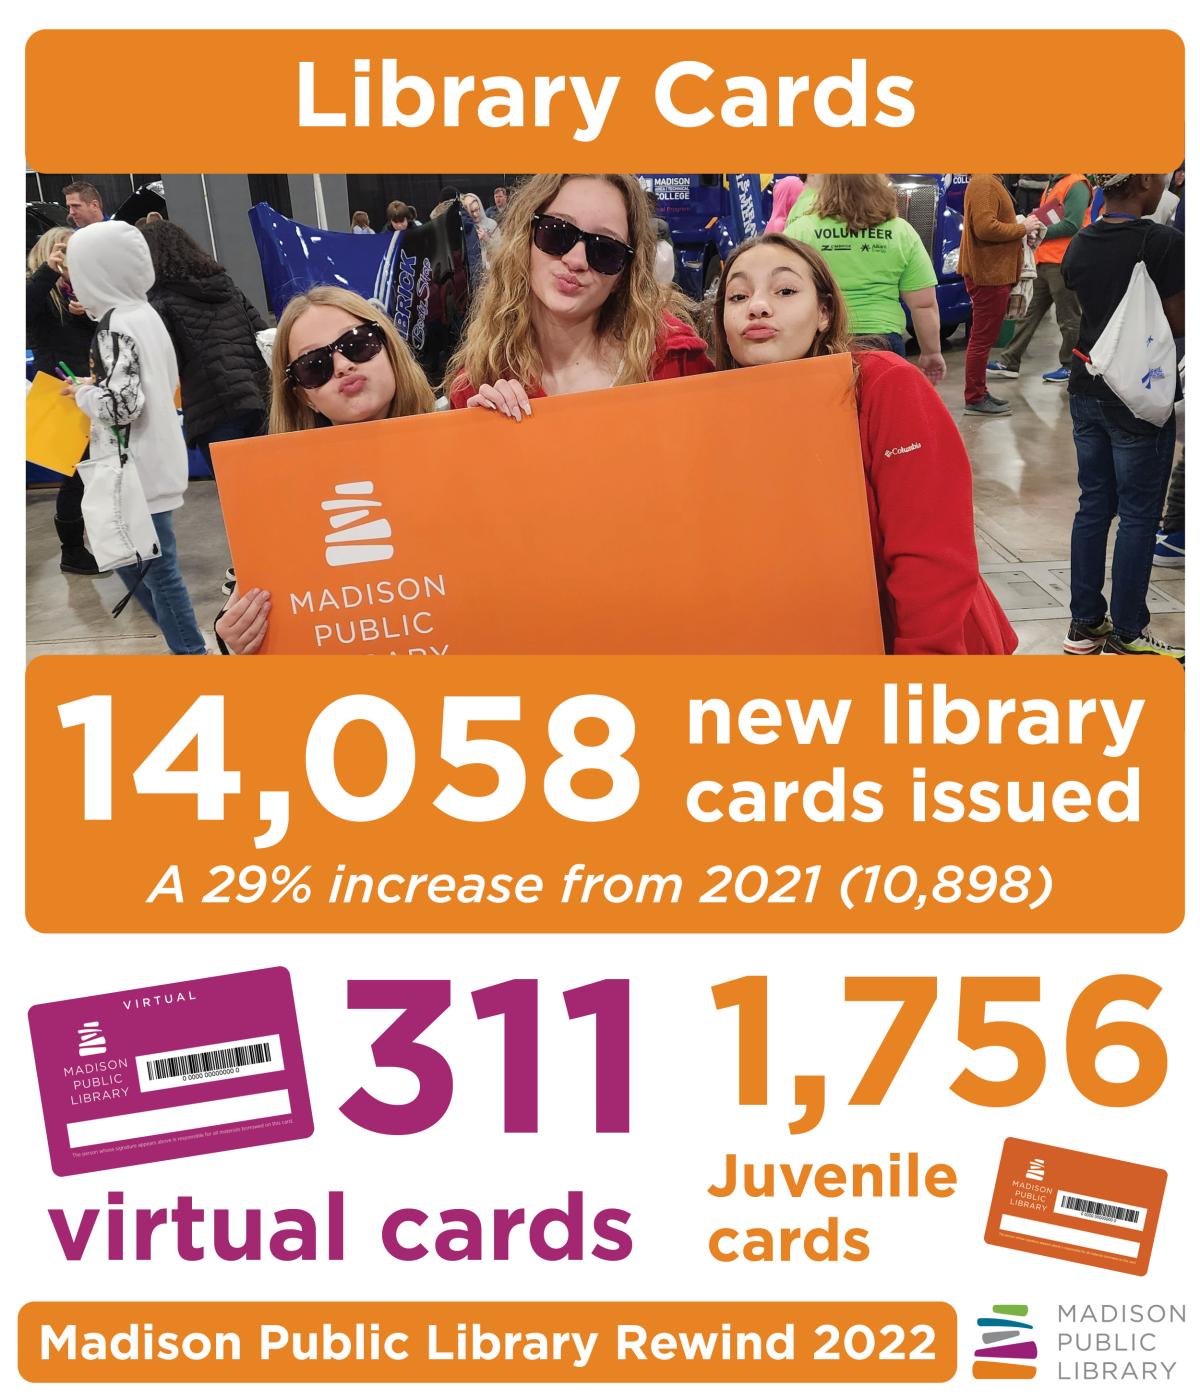 Madison Public Library issued 14,058 Library Cards in 2022